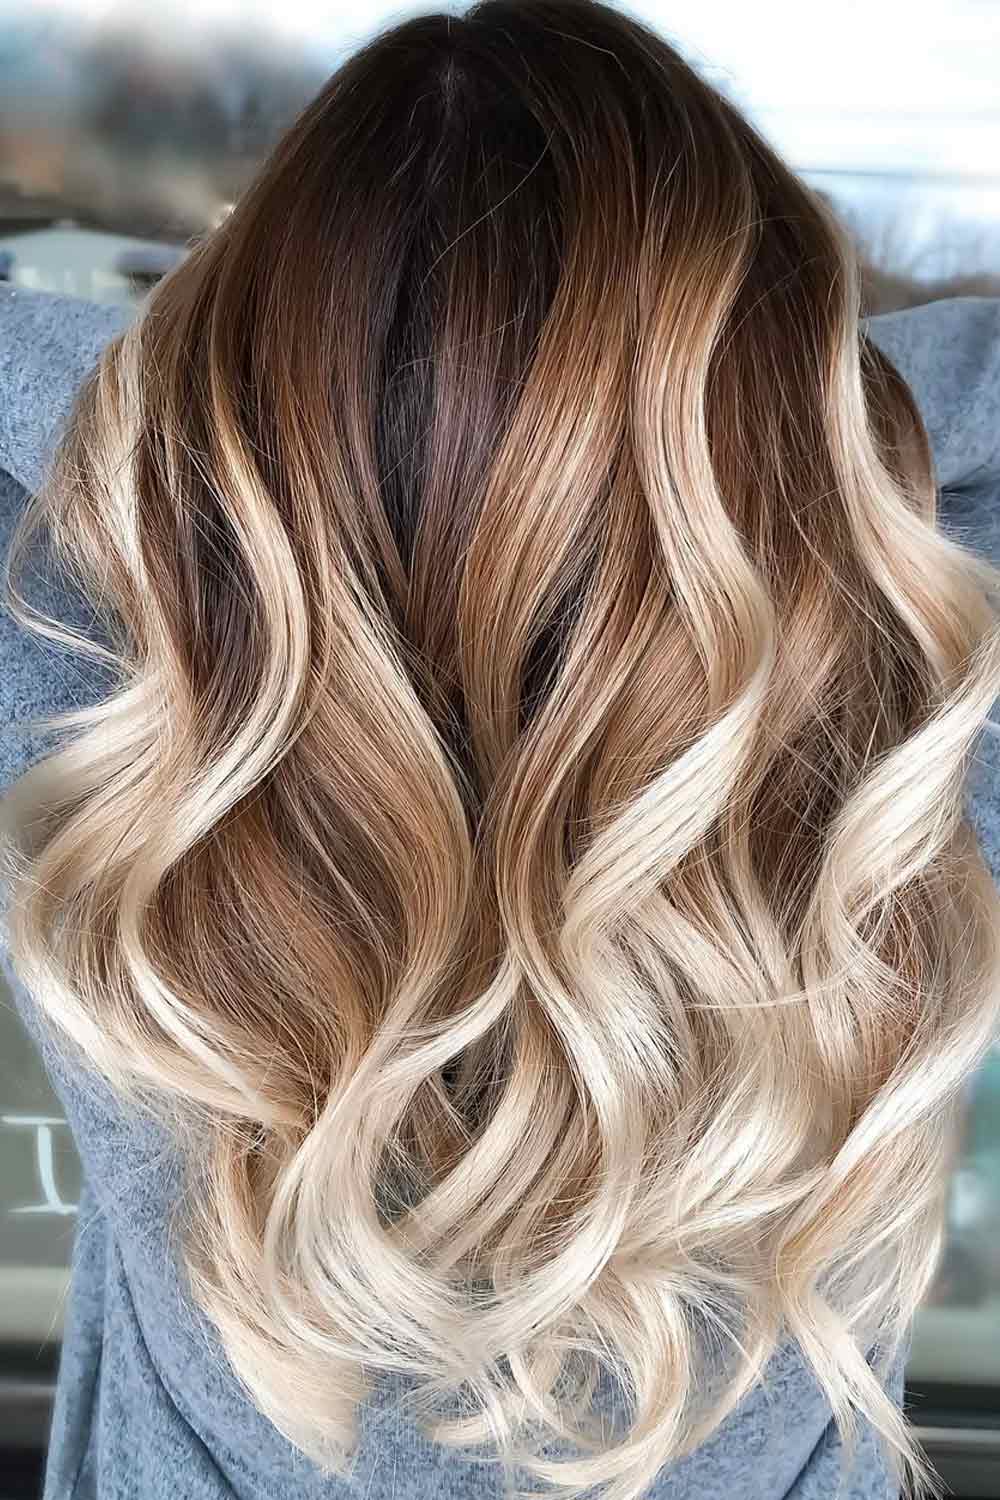 Dark Brown Hair with Blonde and Copper Highlights